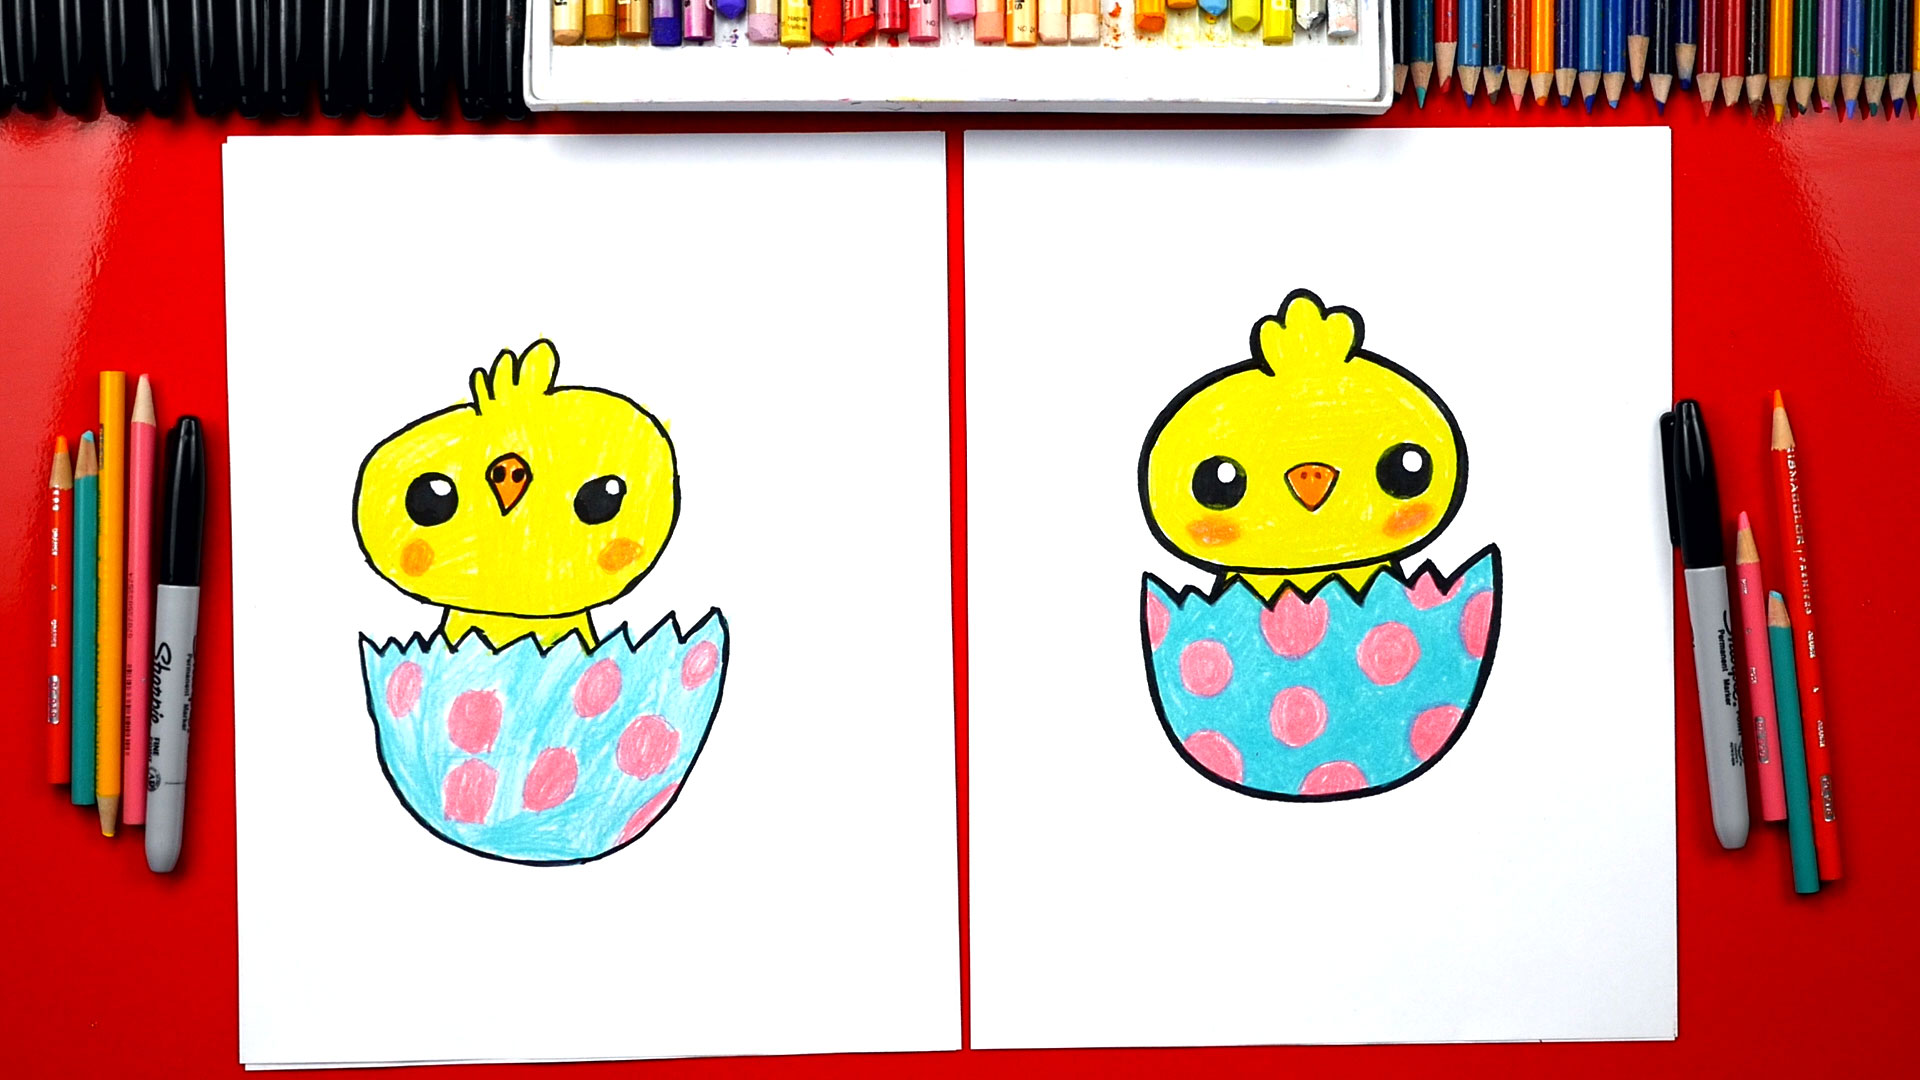 https://artforkidshub.com/wp-content/uploads/2018/03/How-To-Draw-An-Easter-Chick-feature.jpg